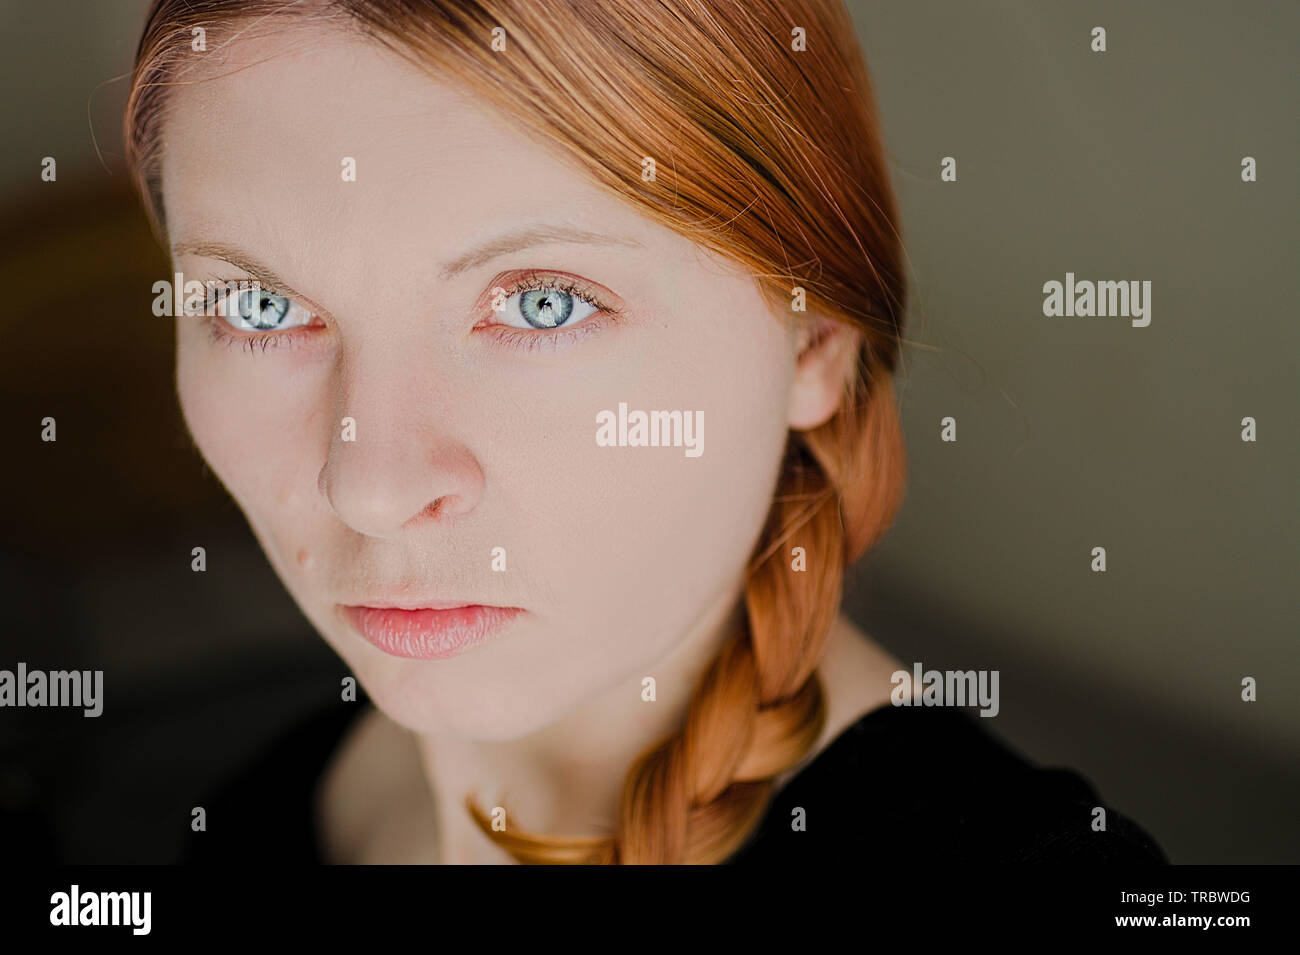 Face of a red hair girl who has a big blue eyes. Polish woman. Stock Photo